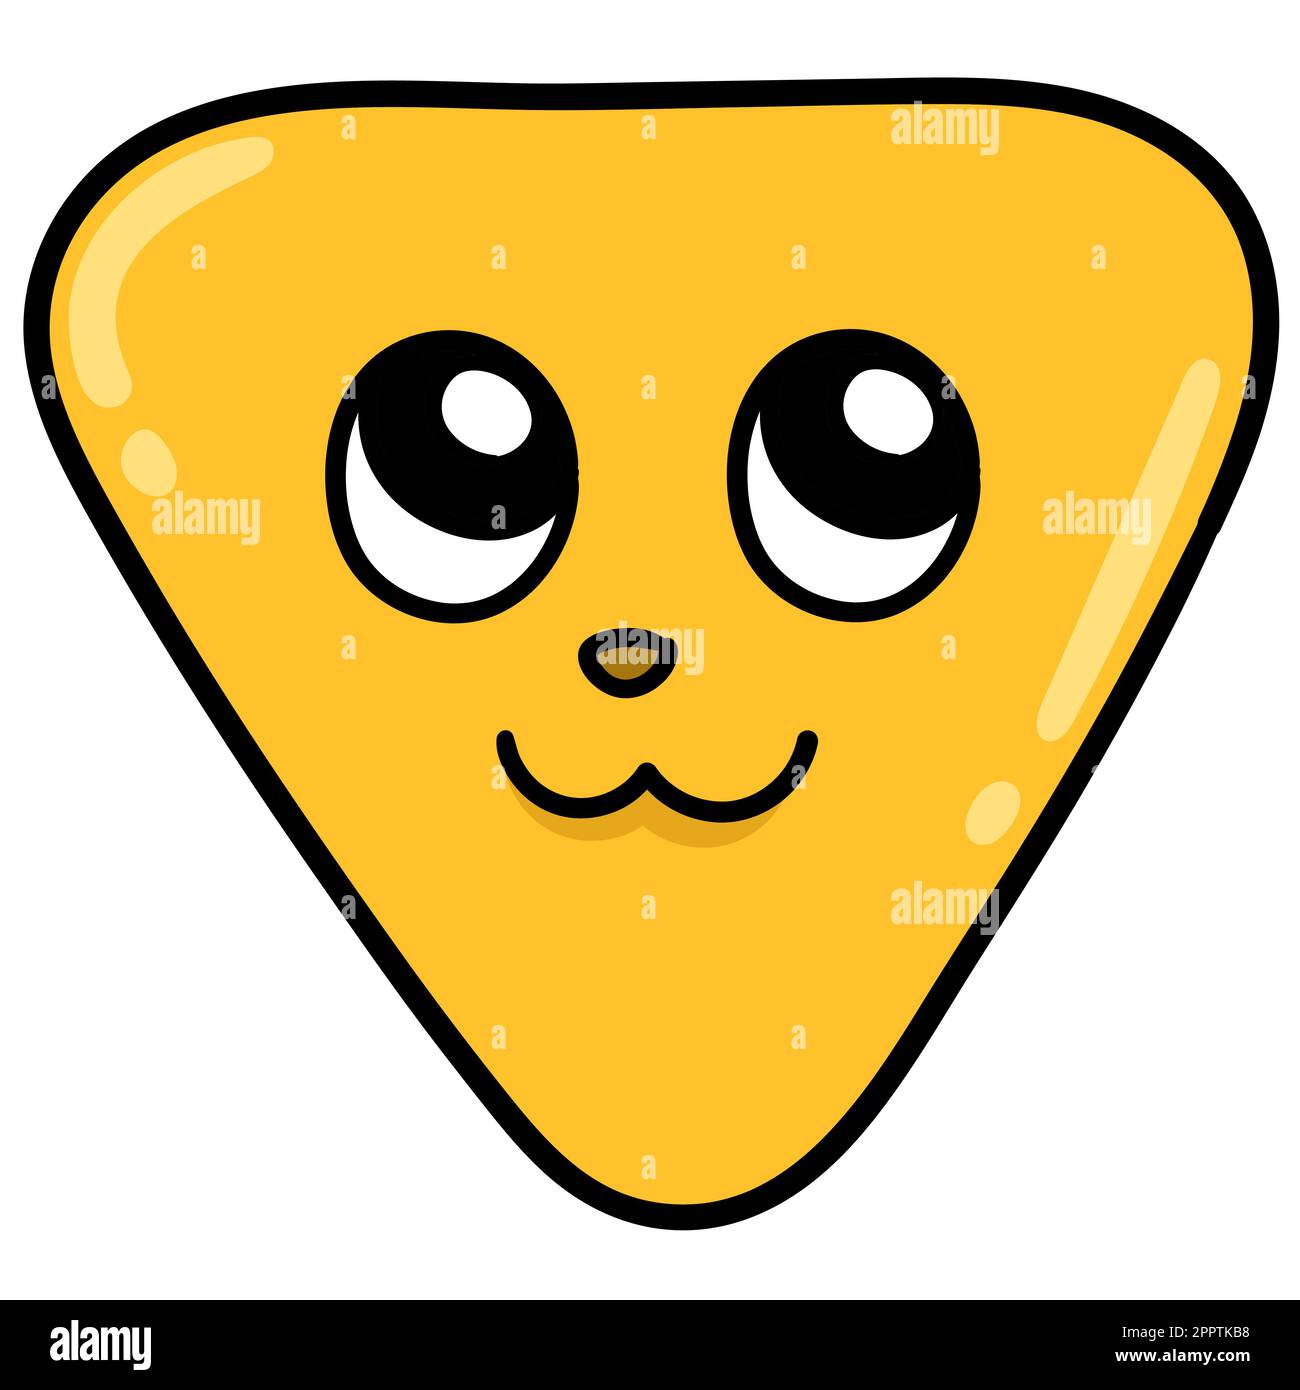 kawaii triangle emoticon with an innocent geeky face, doodle kawaii. doodle icon image Stock Vector